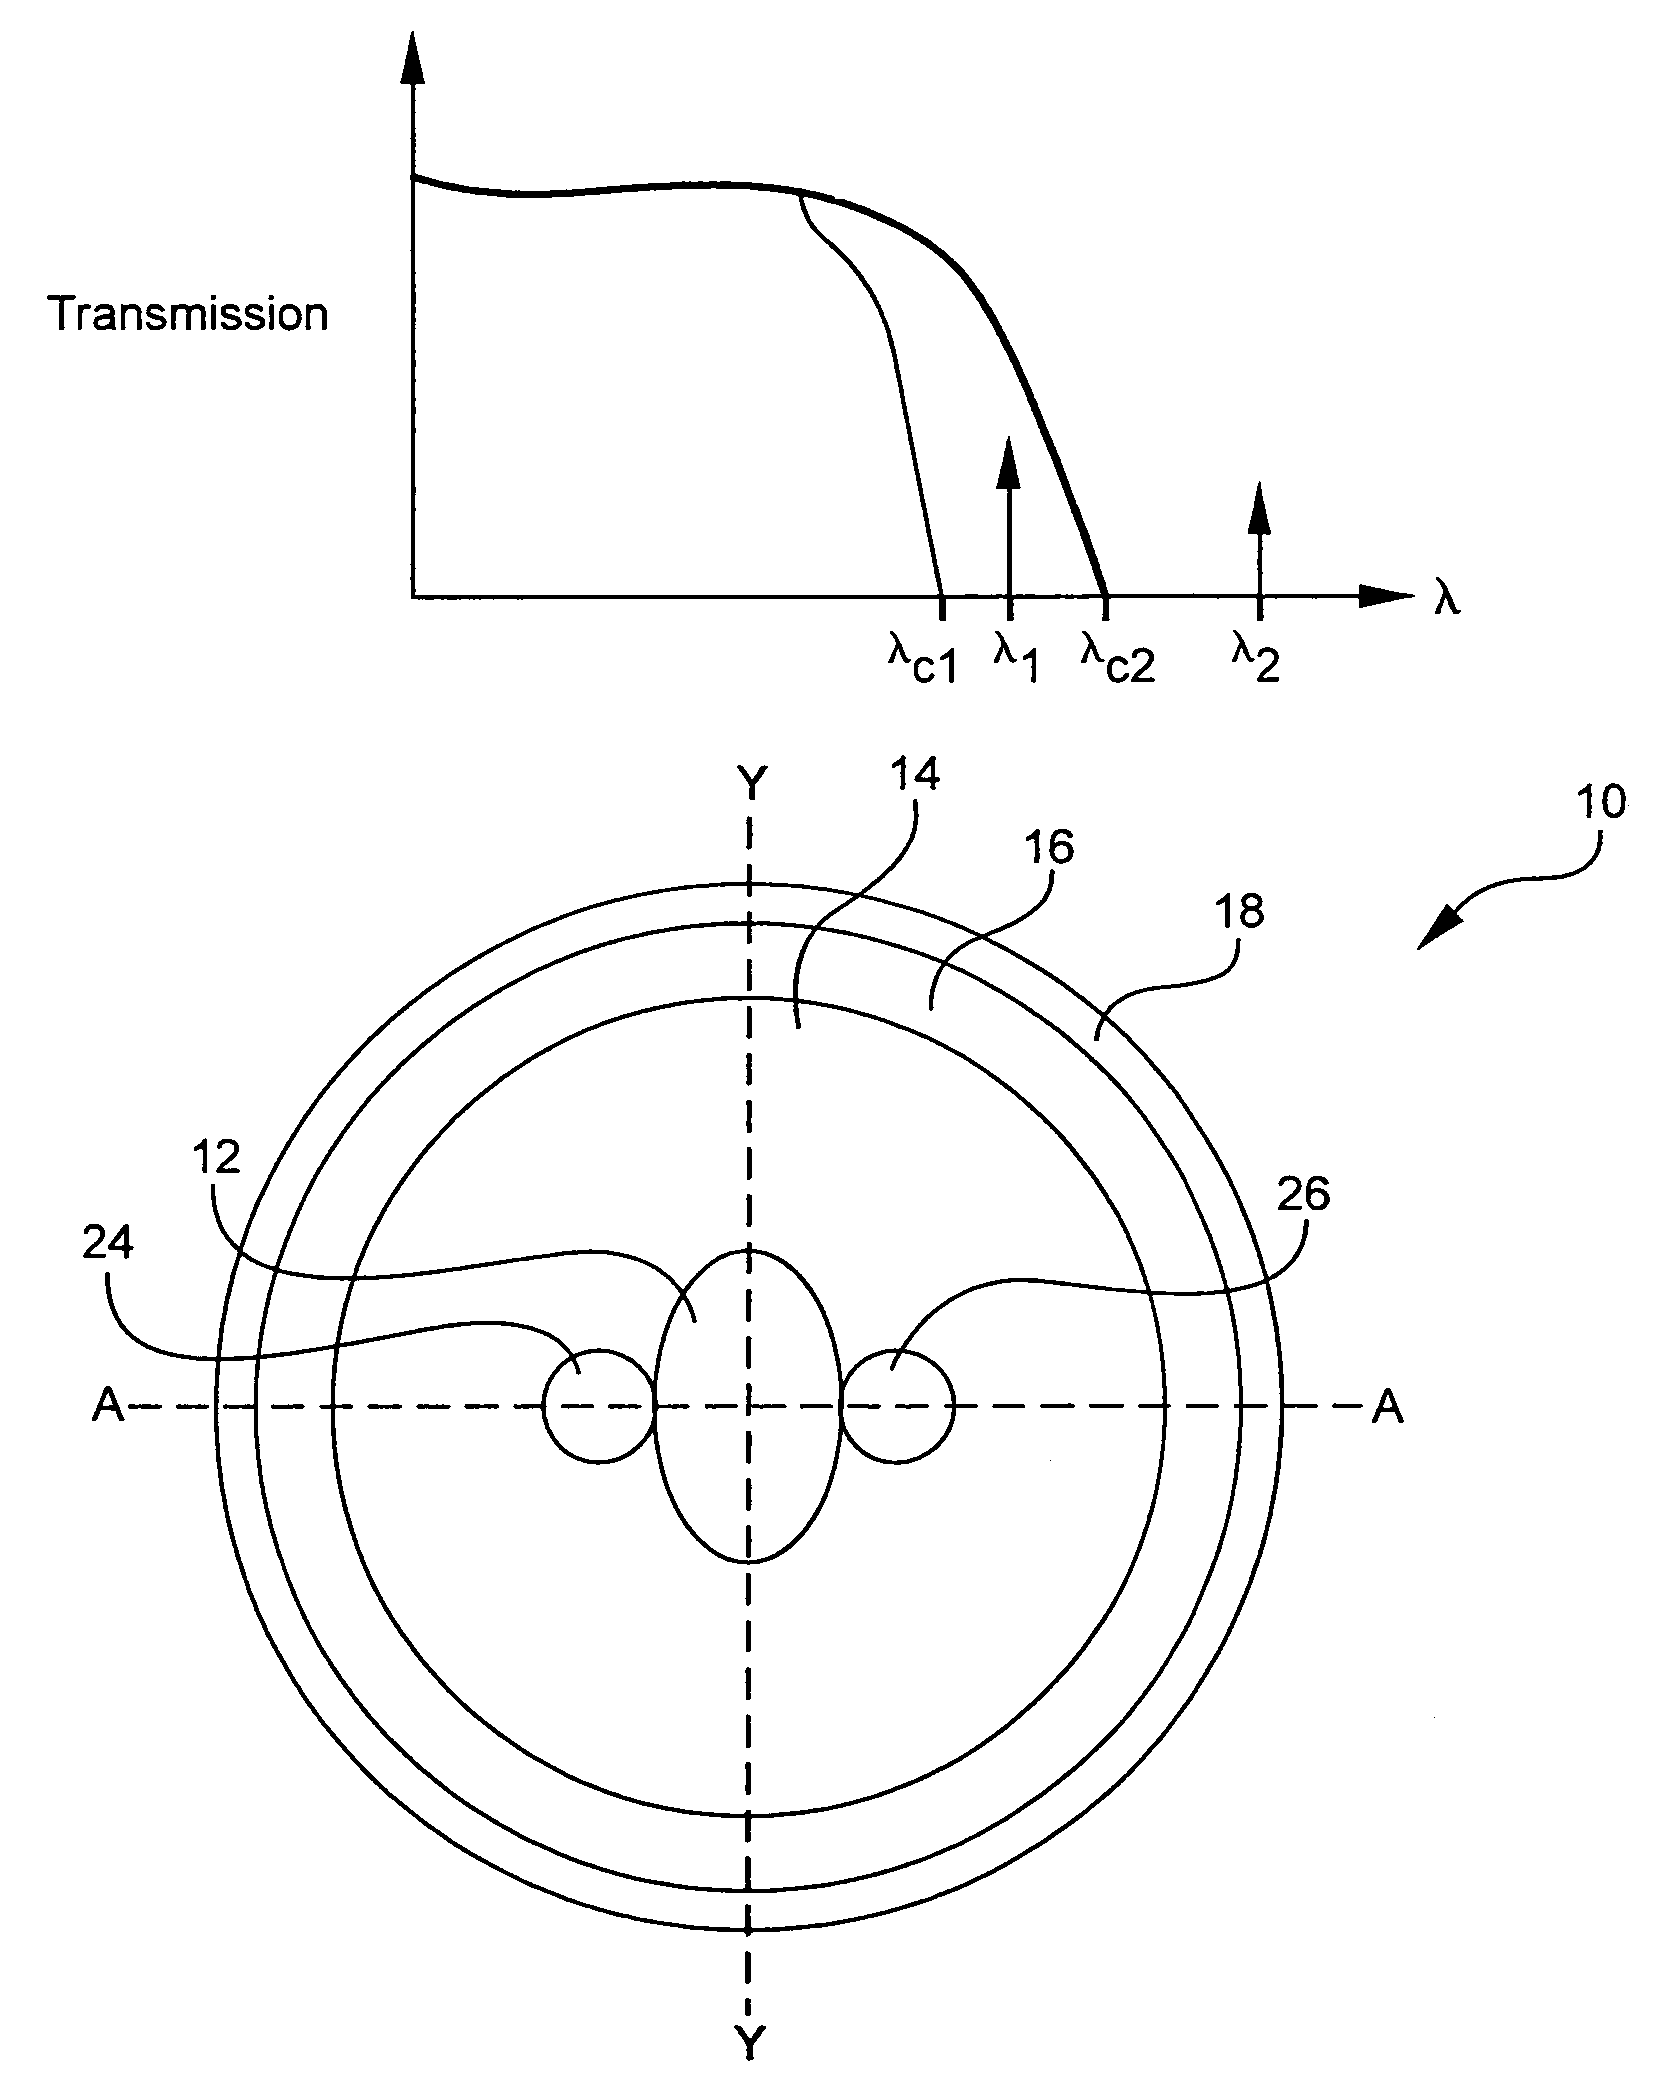 Optical systems utilizing optical fibers transmitting high power signal and a method of operating such systems